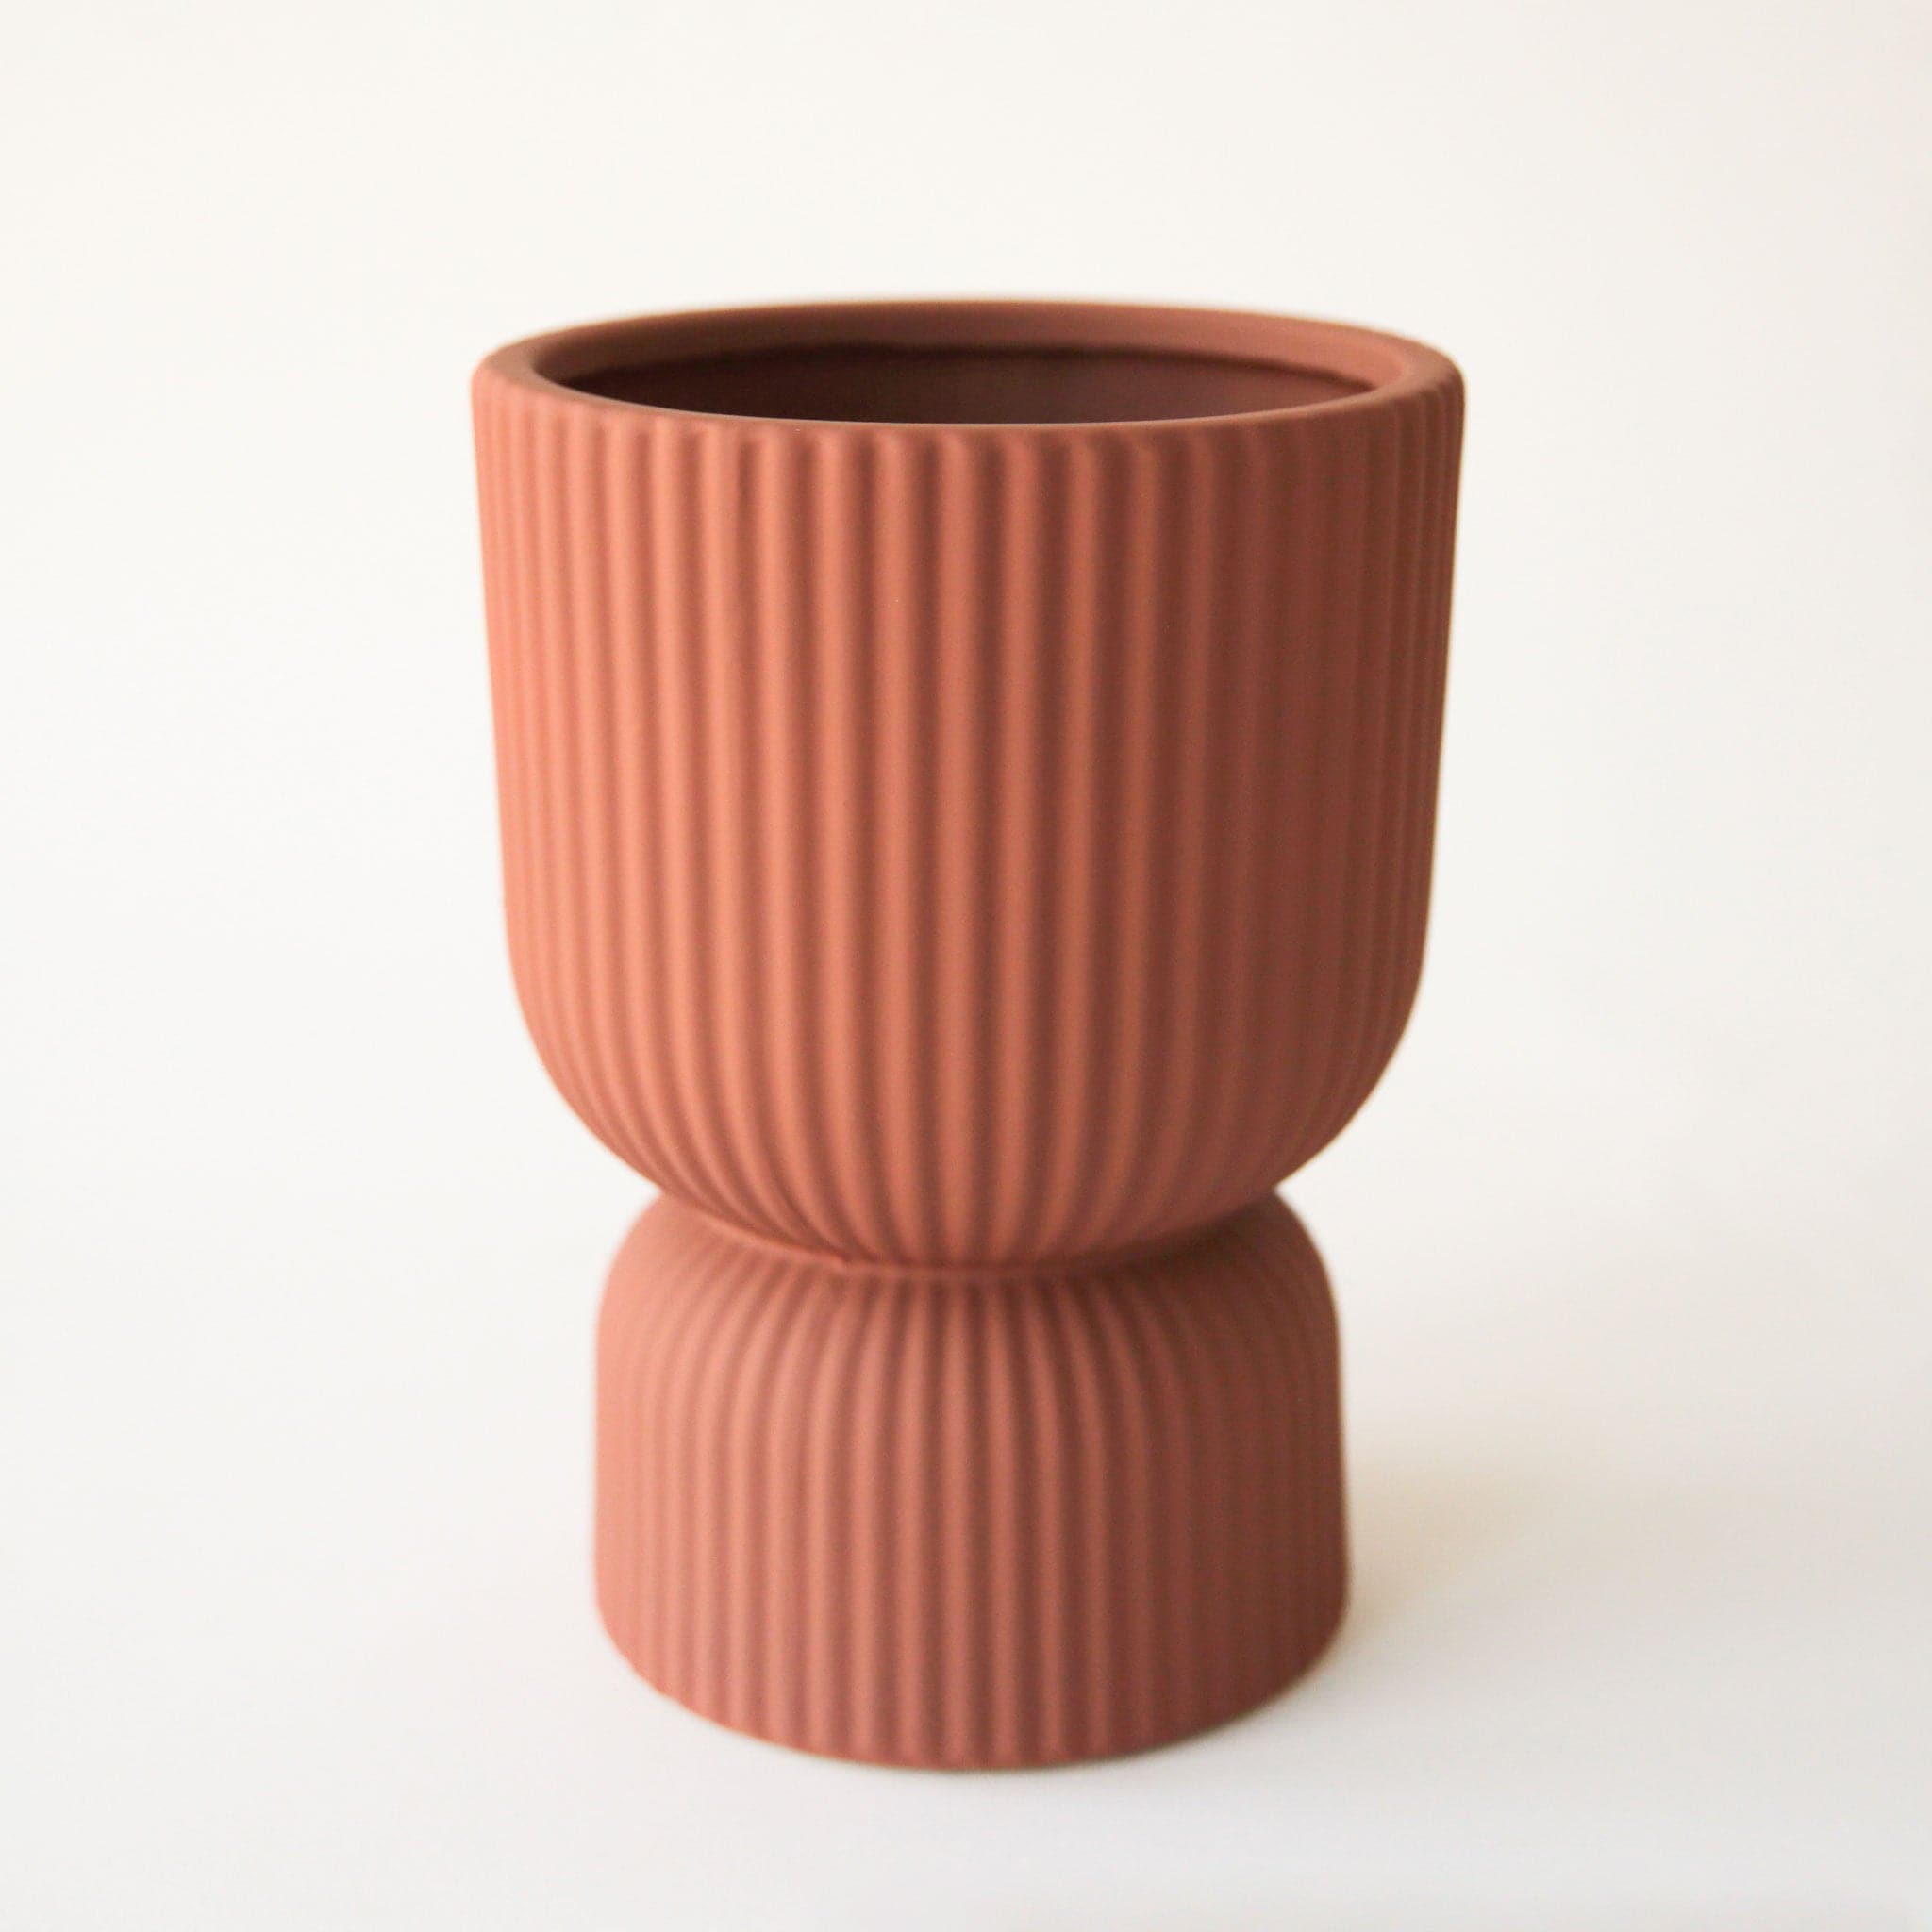 On a white background is ribbed ceramic pedestal vase in a rust/brown shade. 